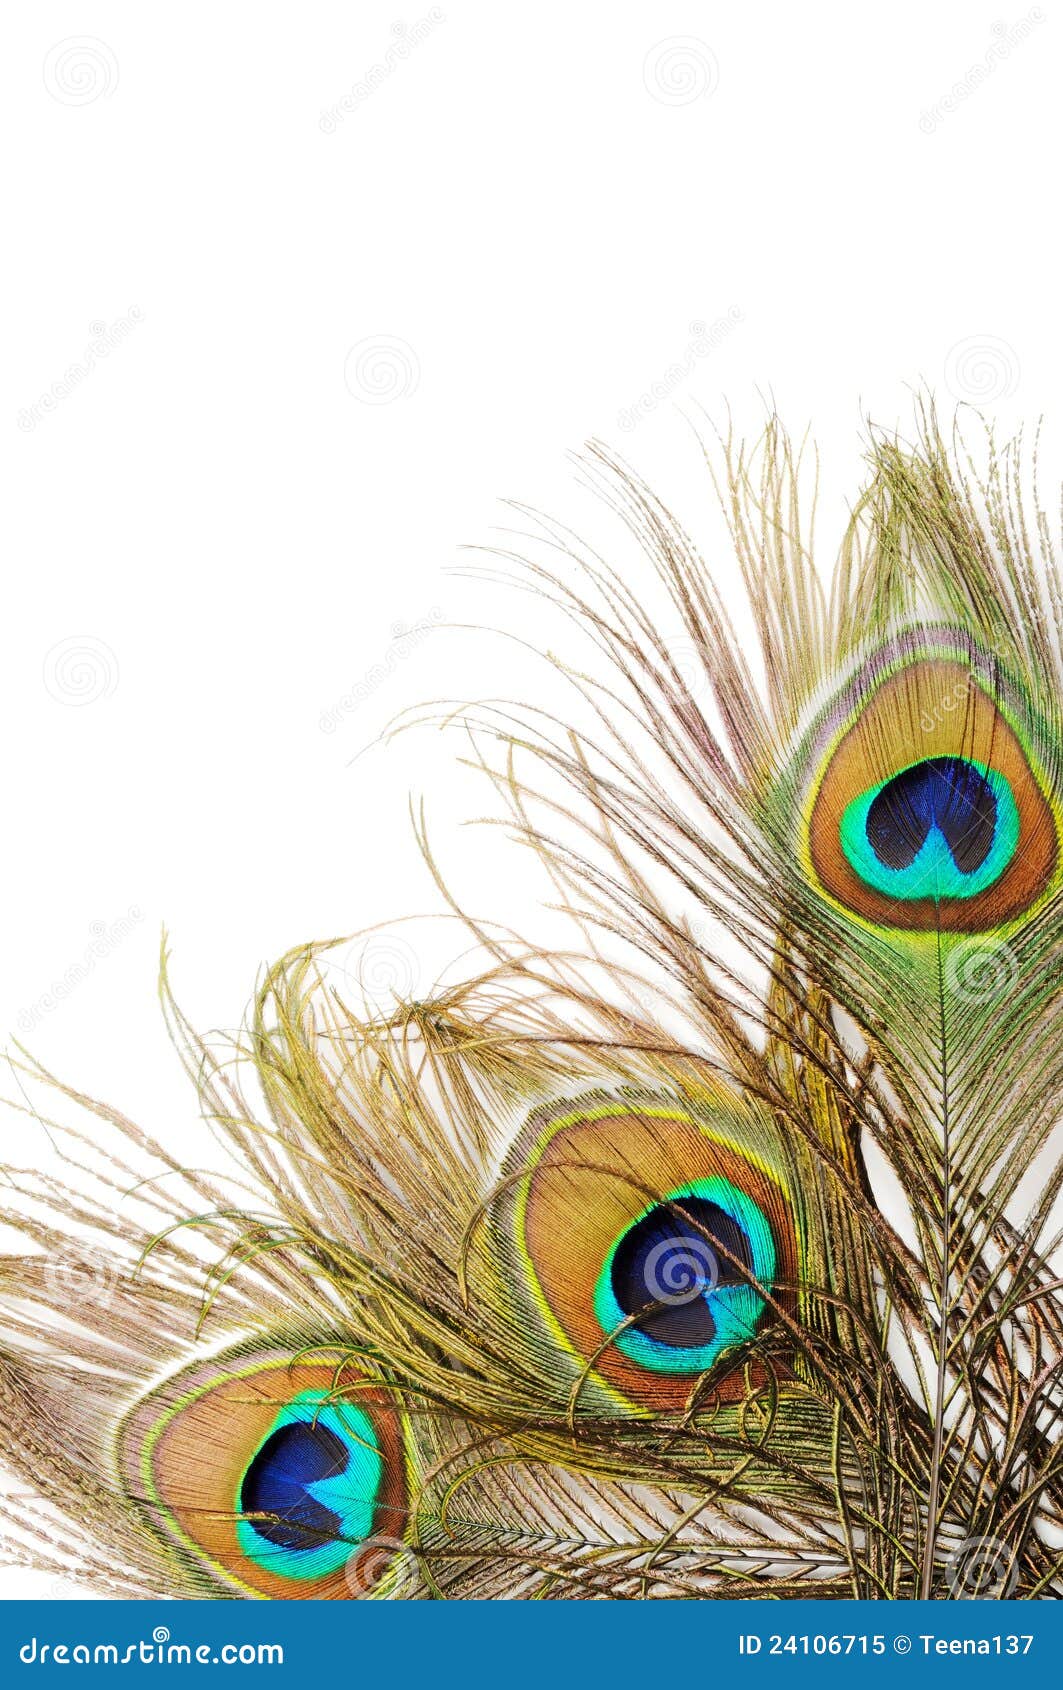 Peacock Feather Background Royalty Free Stock Photo - Image: 24106715